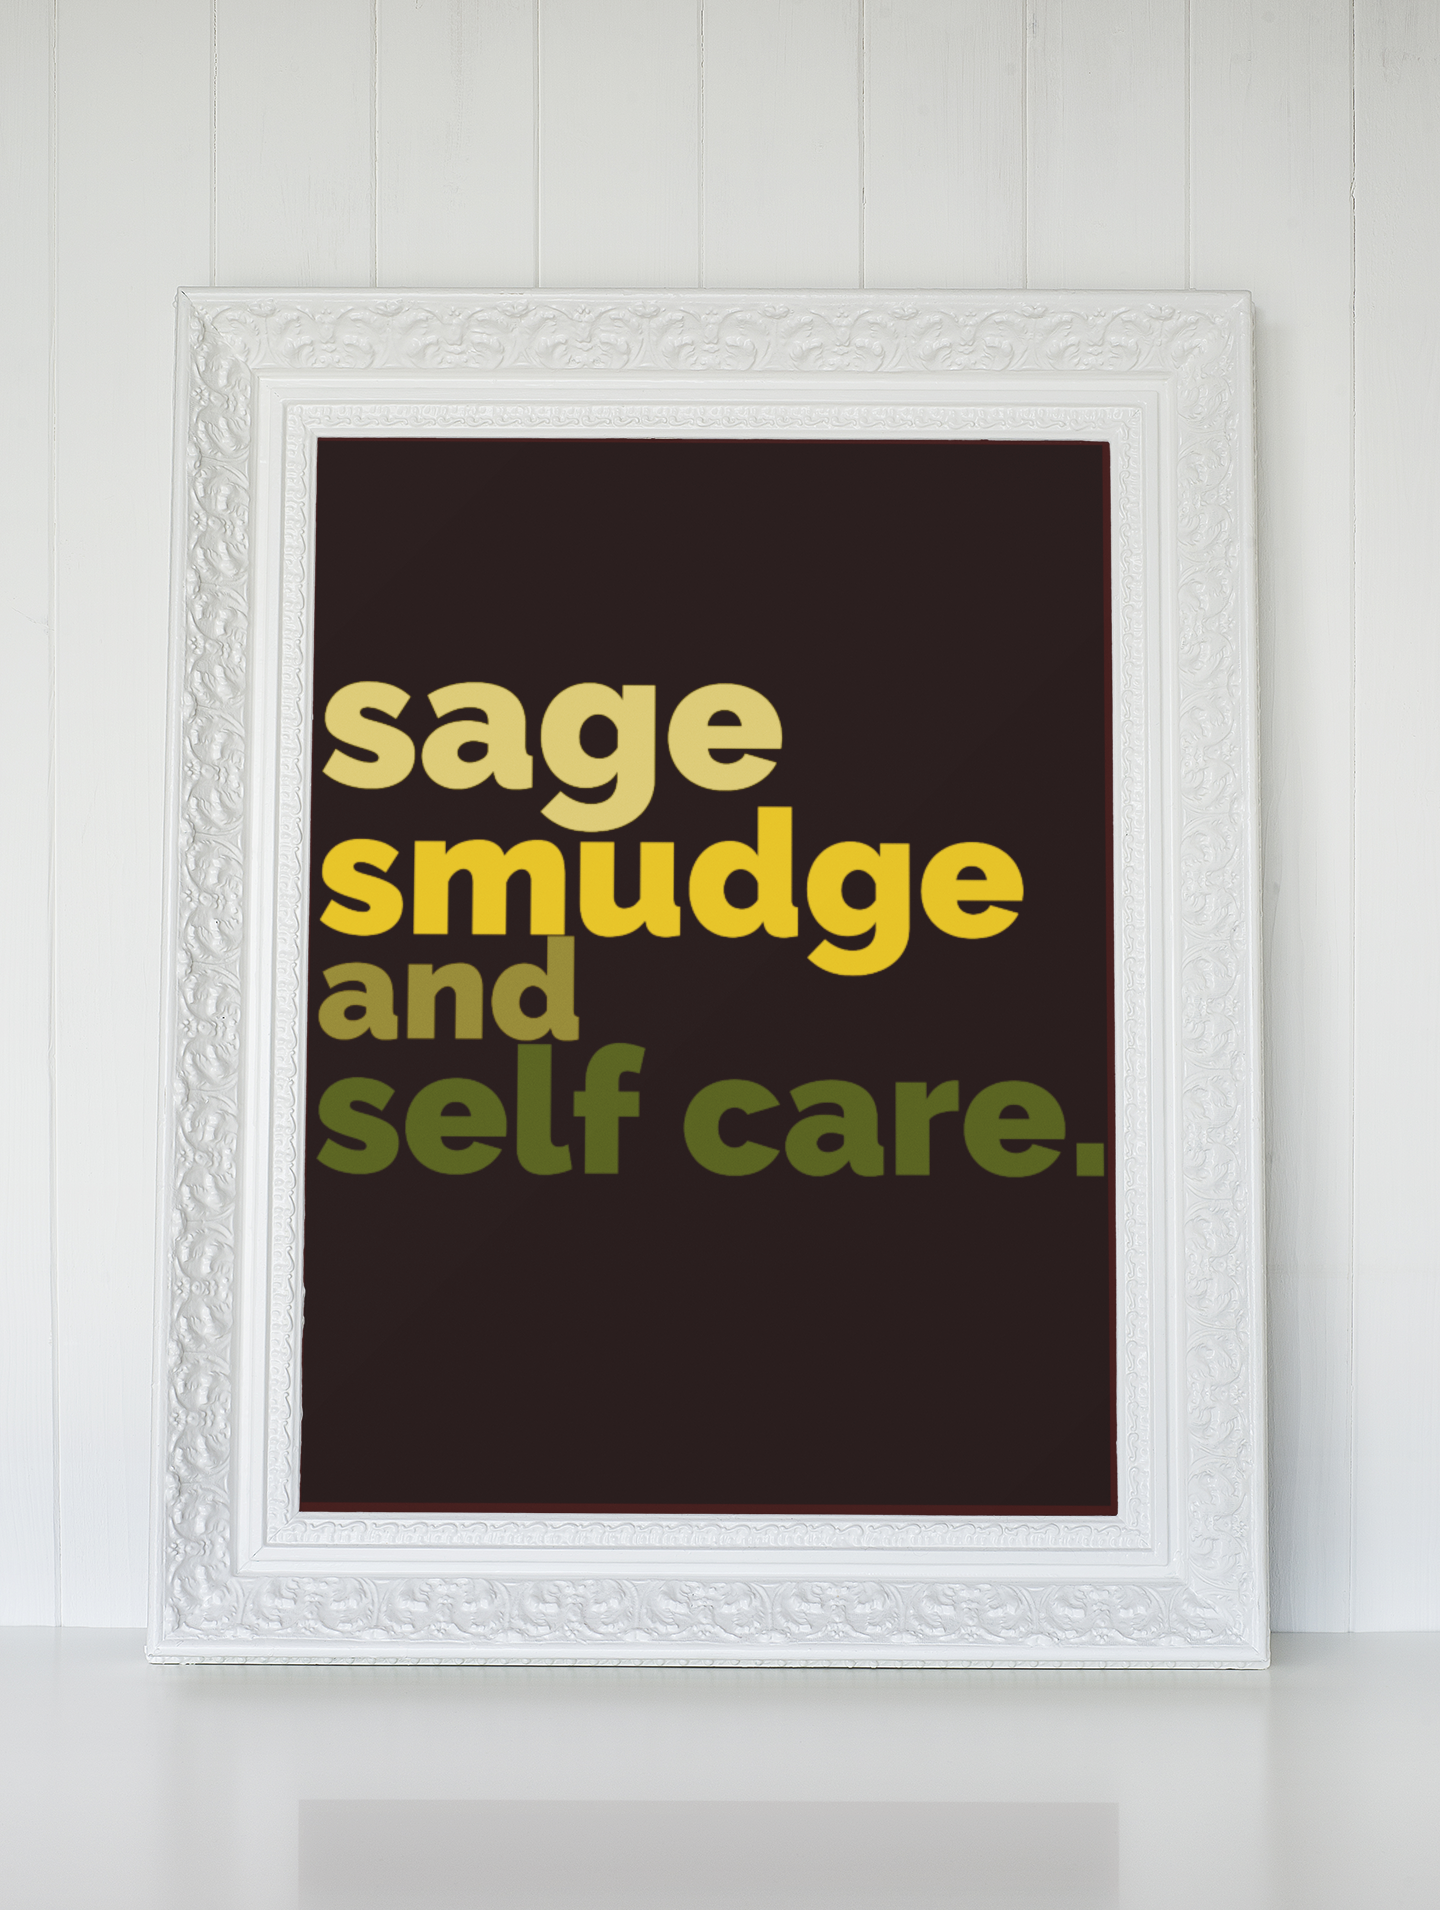 The Sage posters